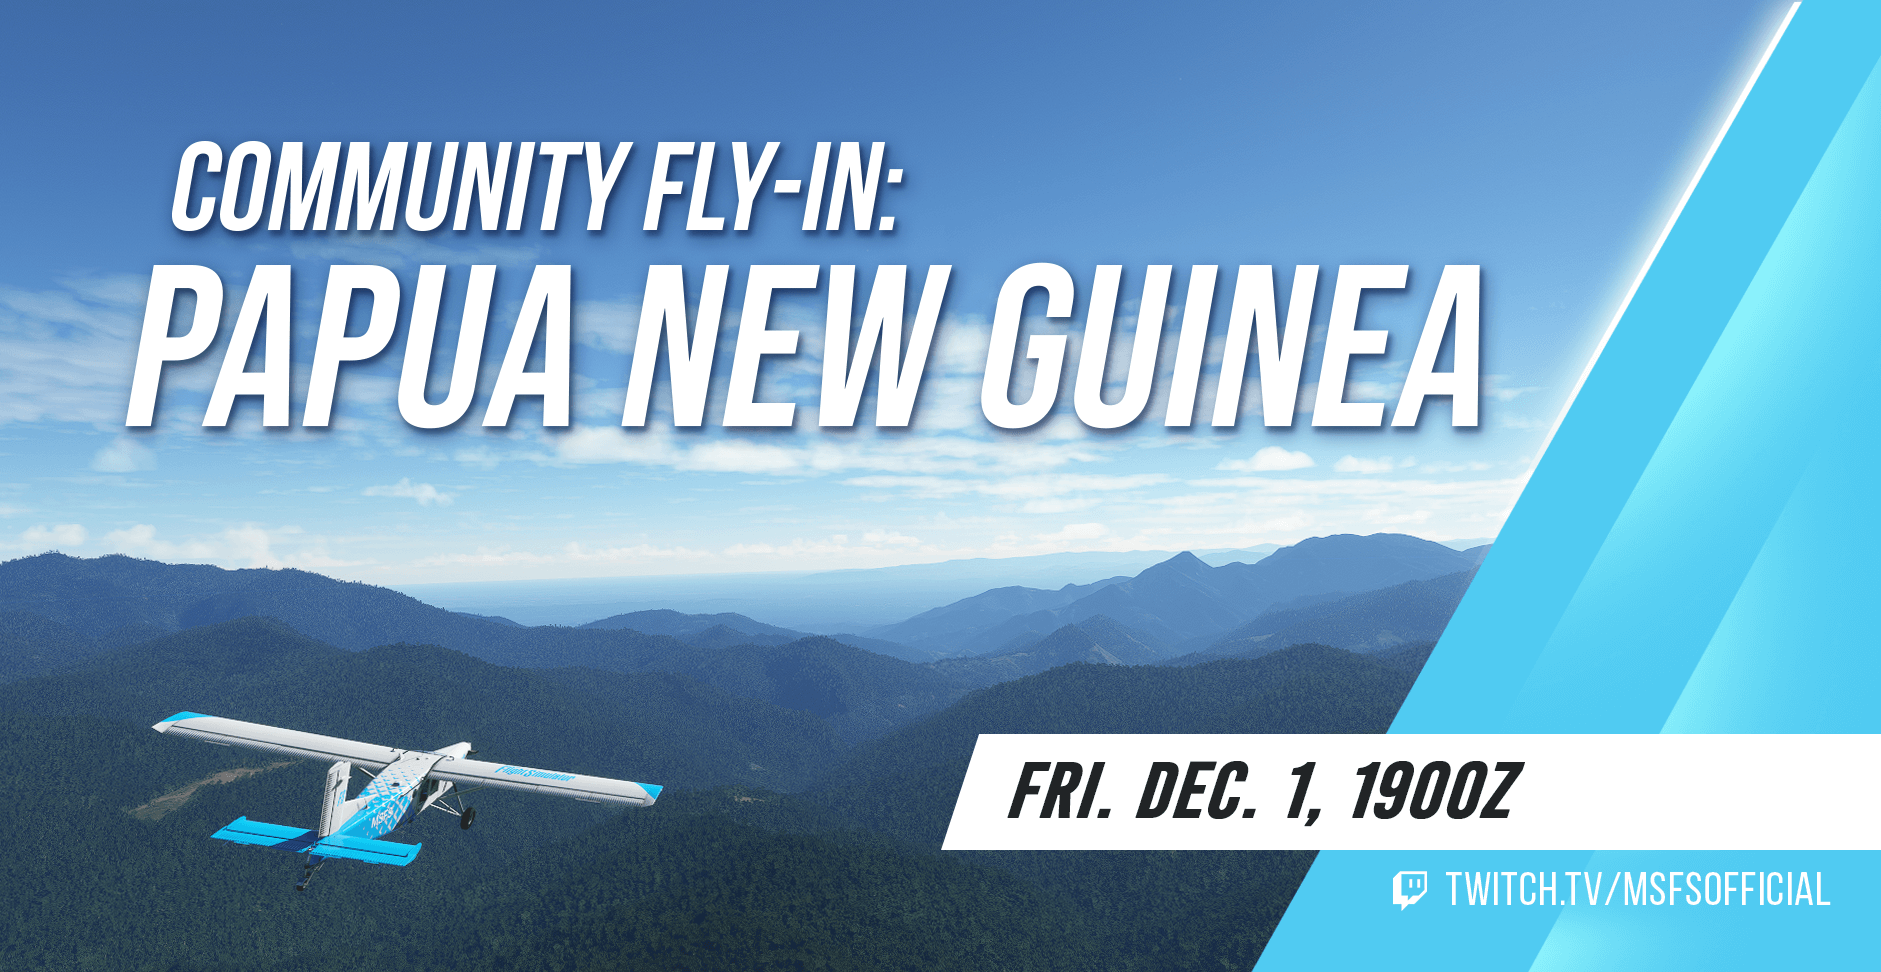 Community Fly-In: Papua New Guinea. Friday December 1st 1900z. www.twitch.tv/msfsofficial